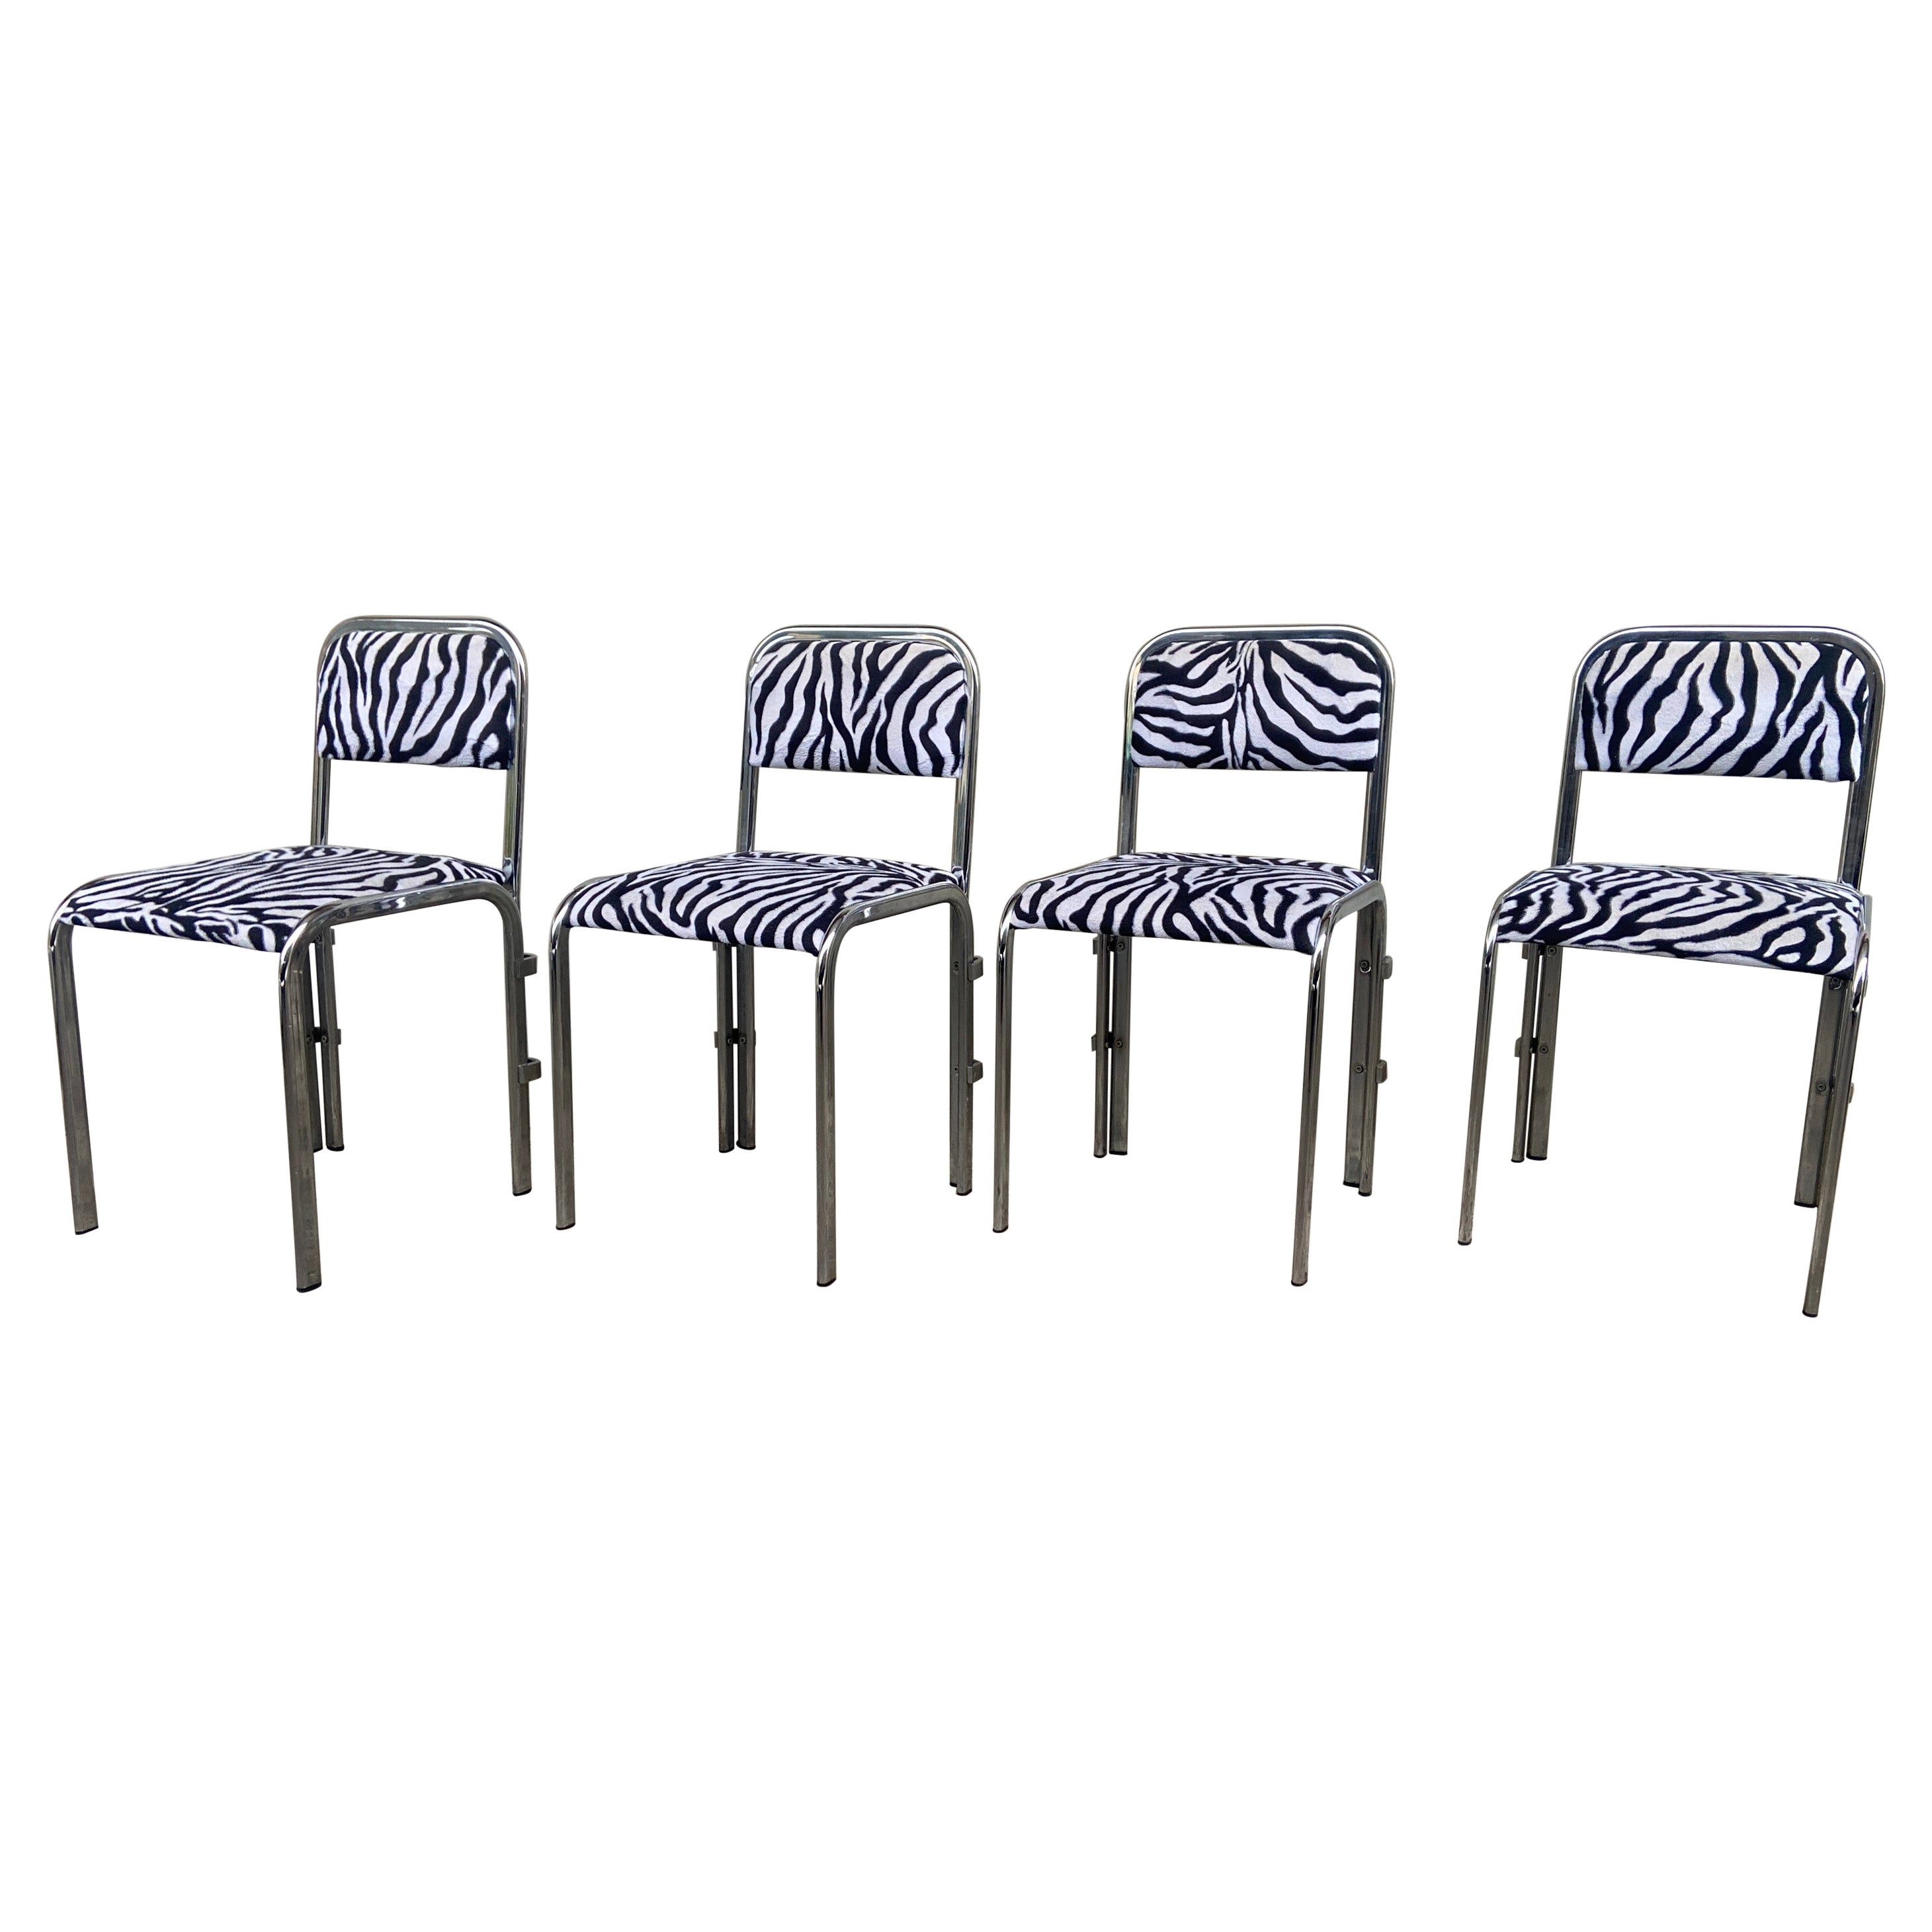 Mid-Century Modern French Set of Four Chrome Chairs Covered with Zebra Fabric For Sale